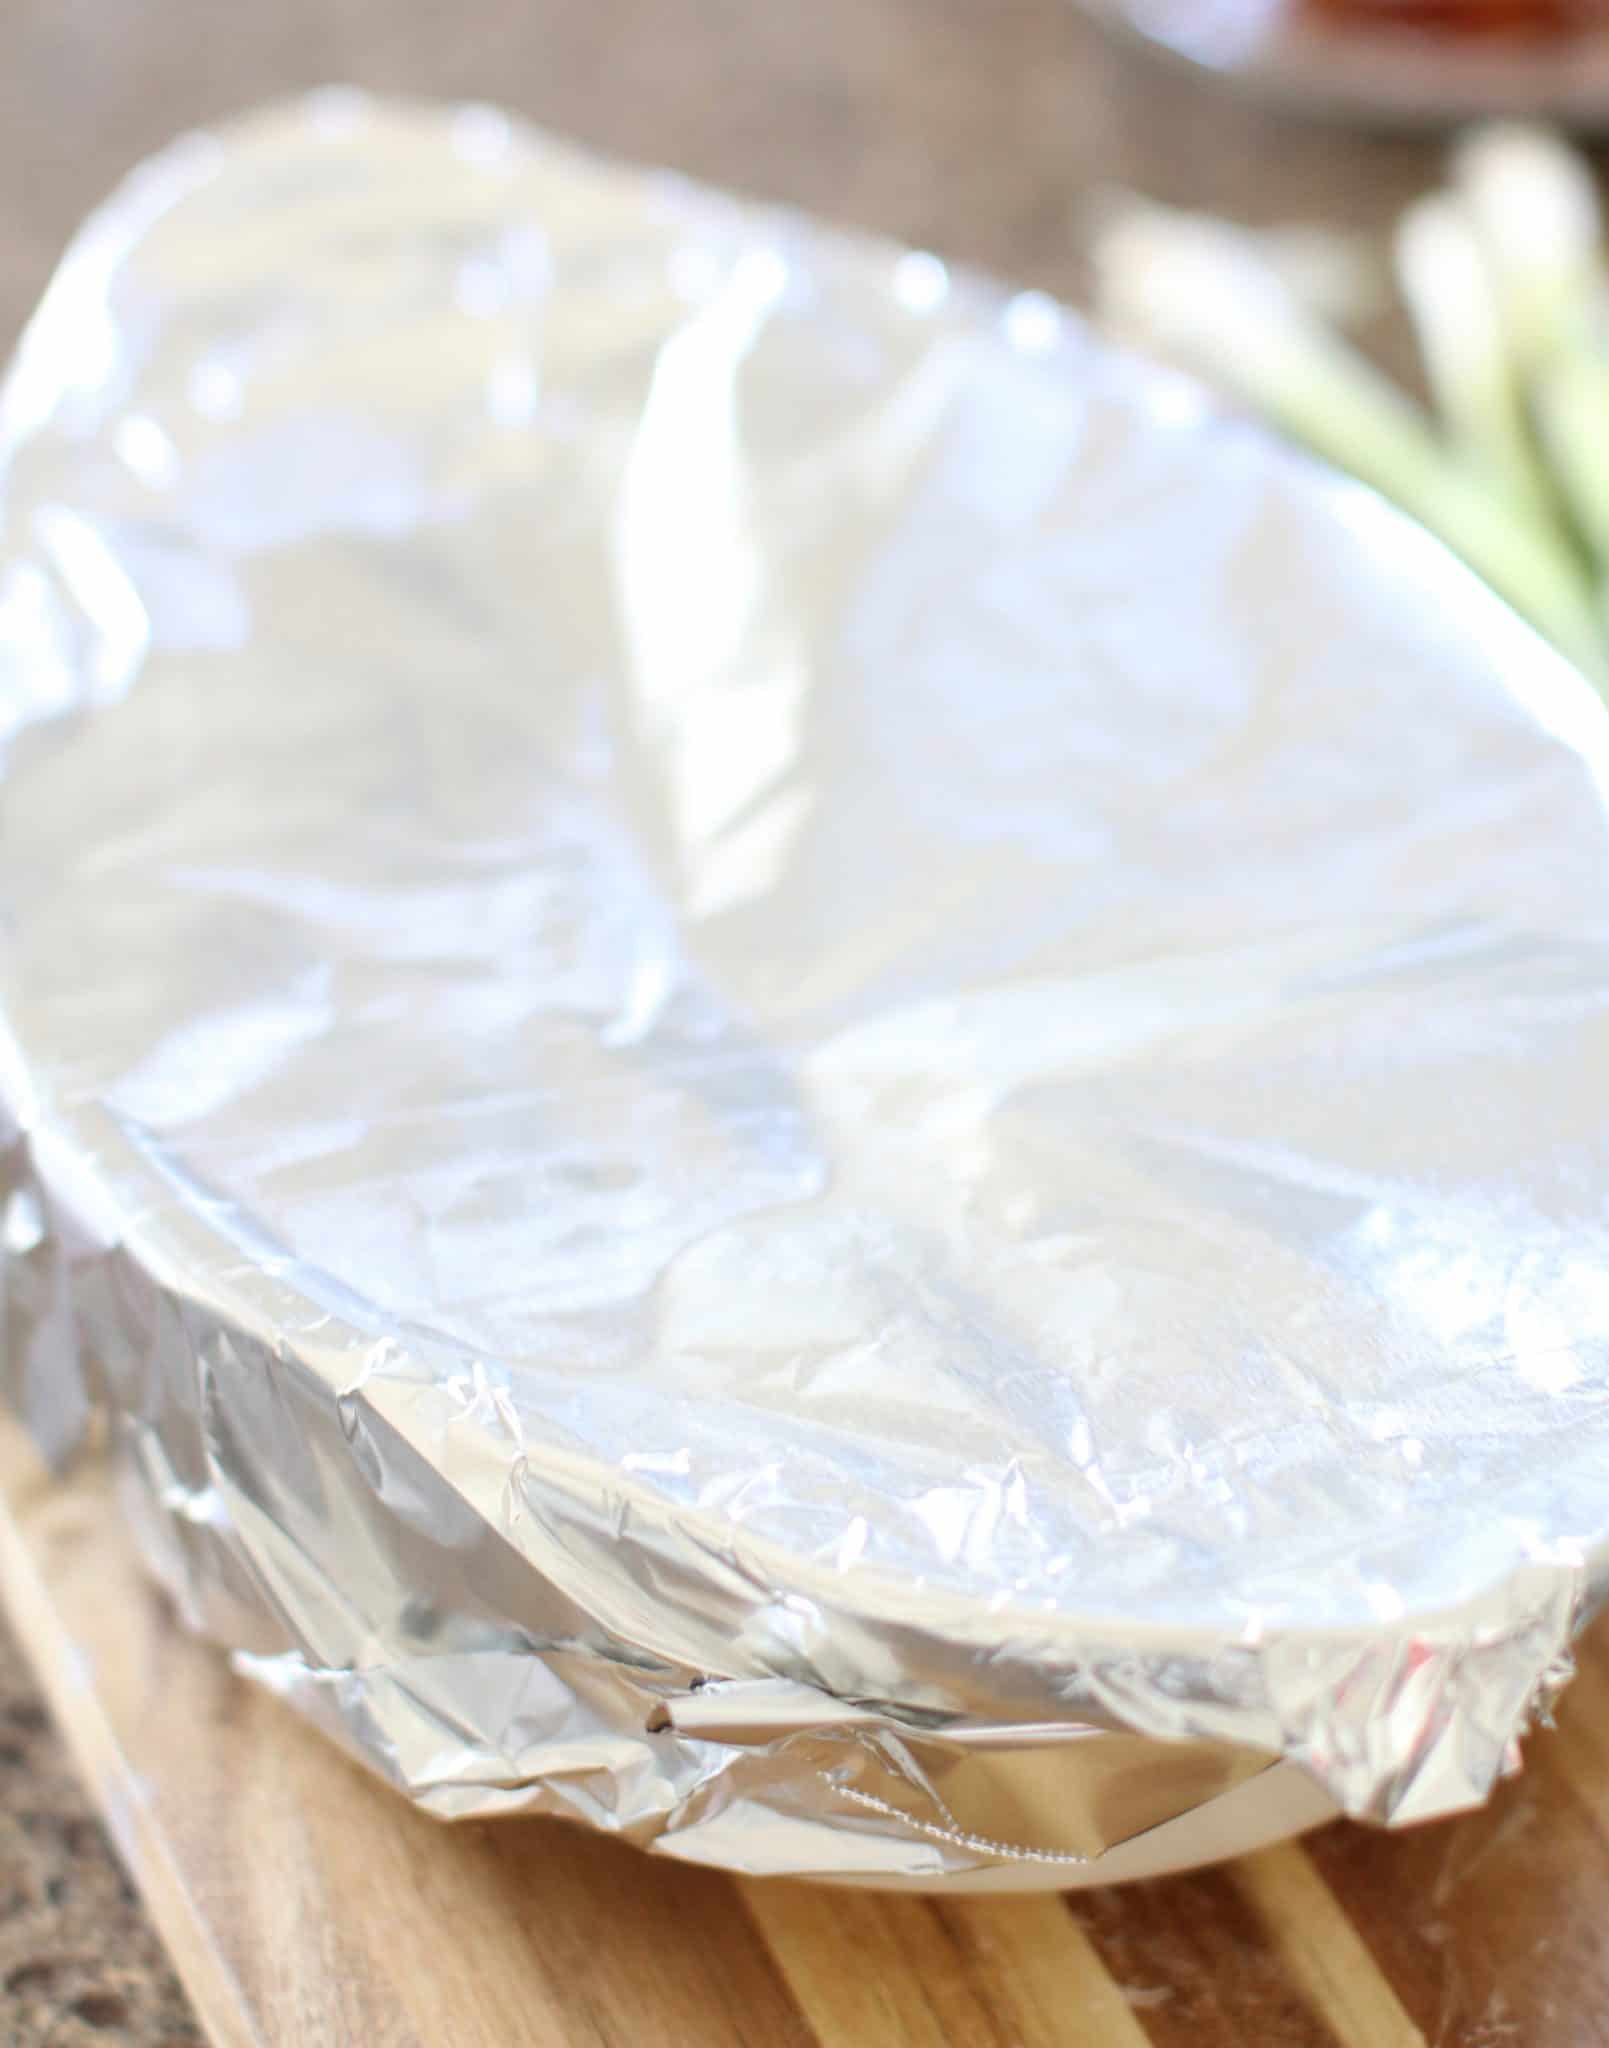 white oval baking dish shown covered with nonstick aluminum foil.